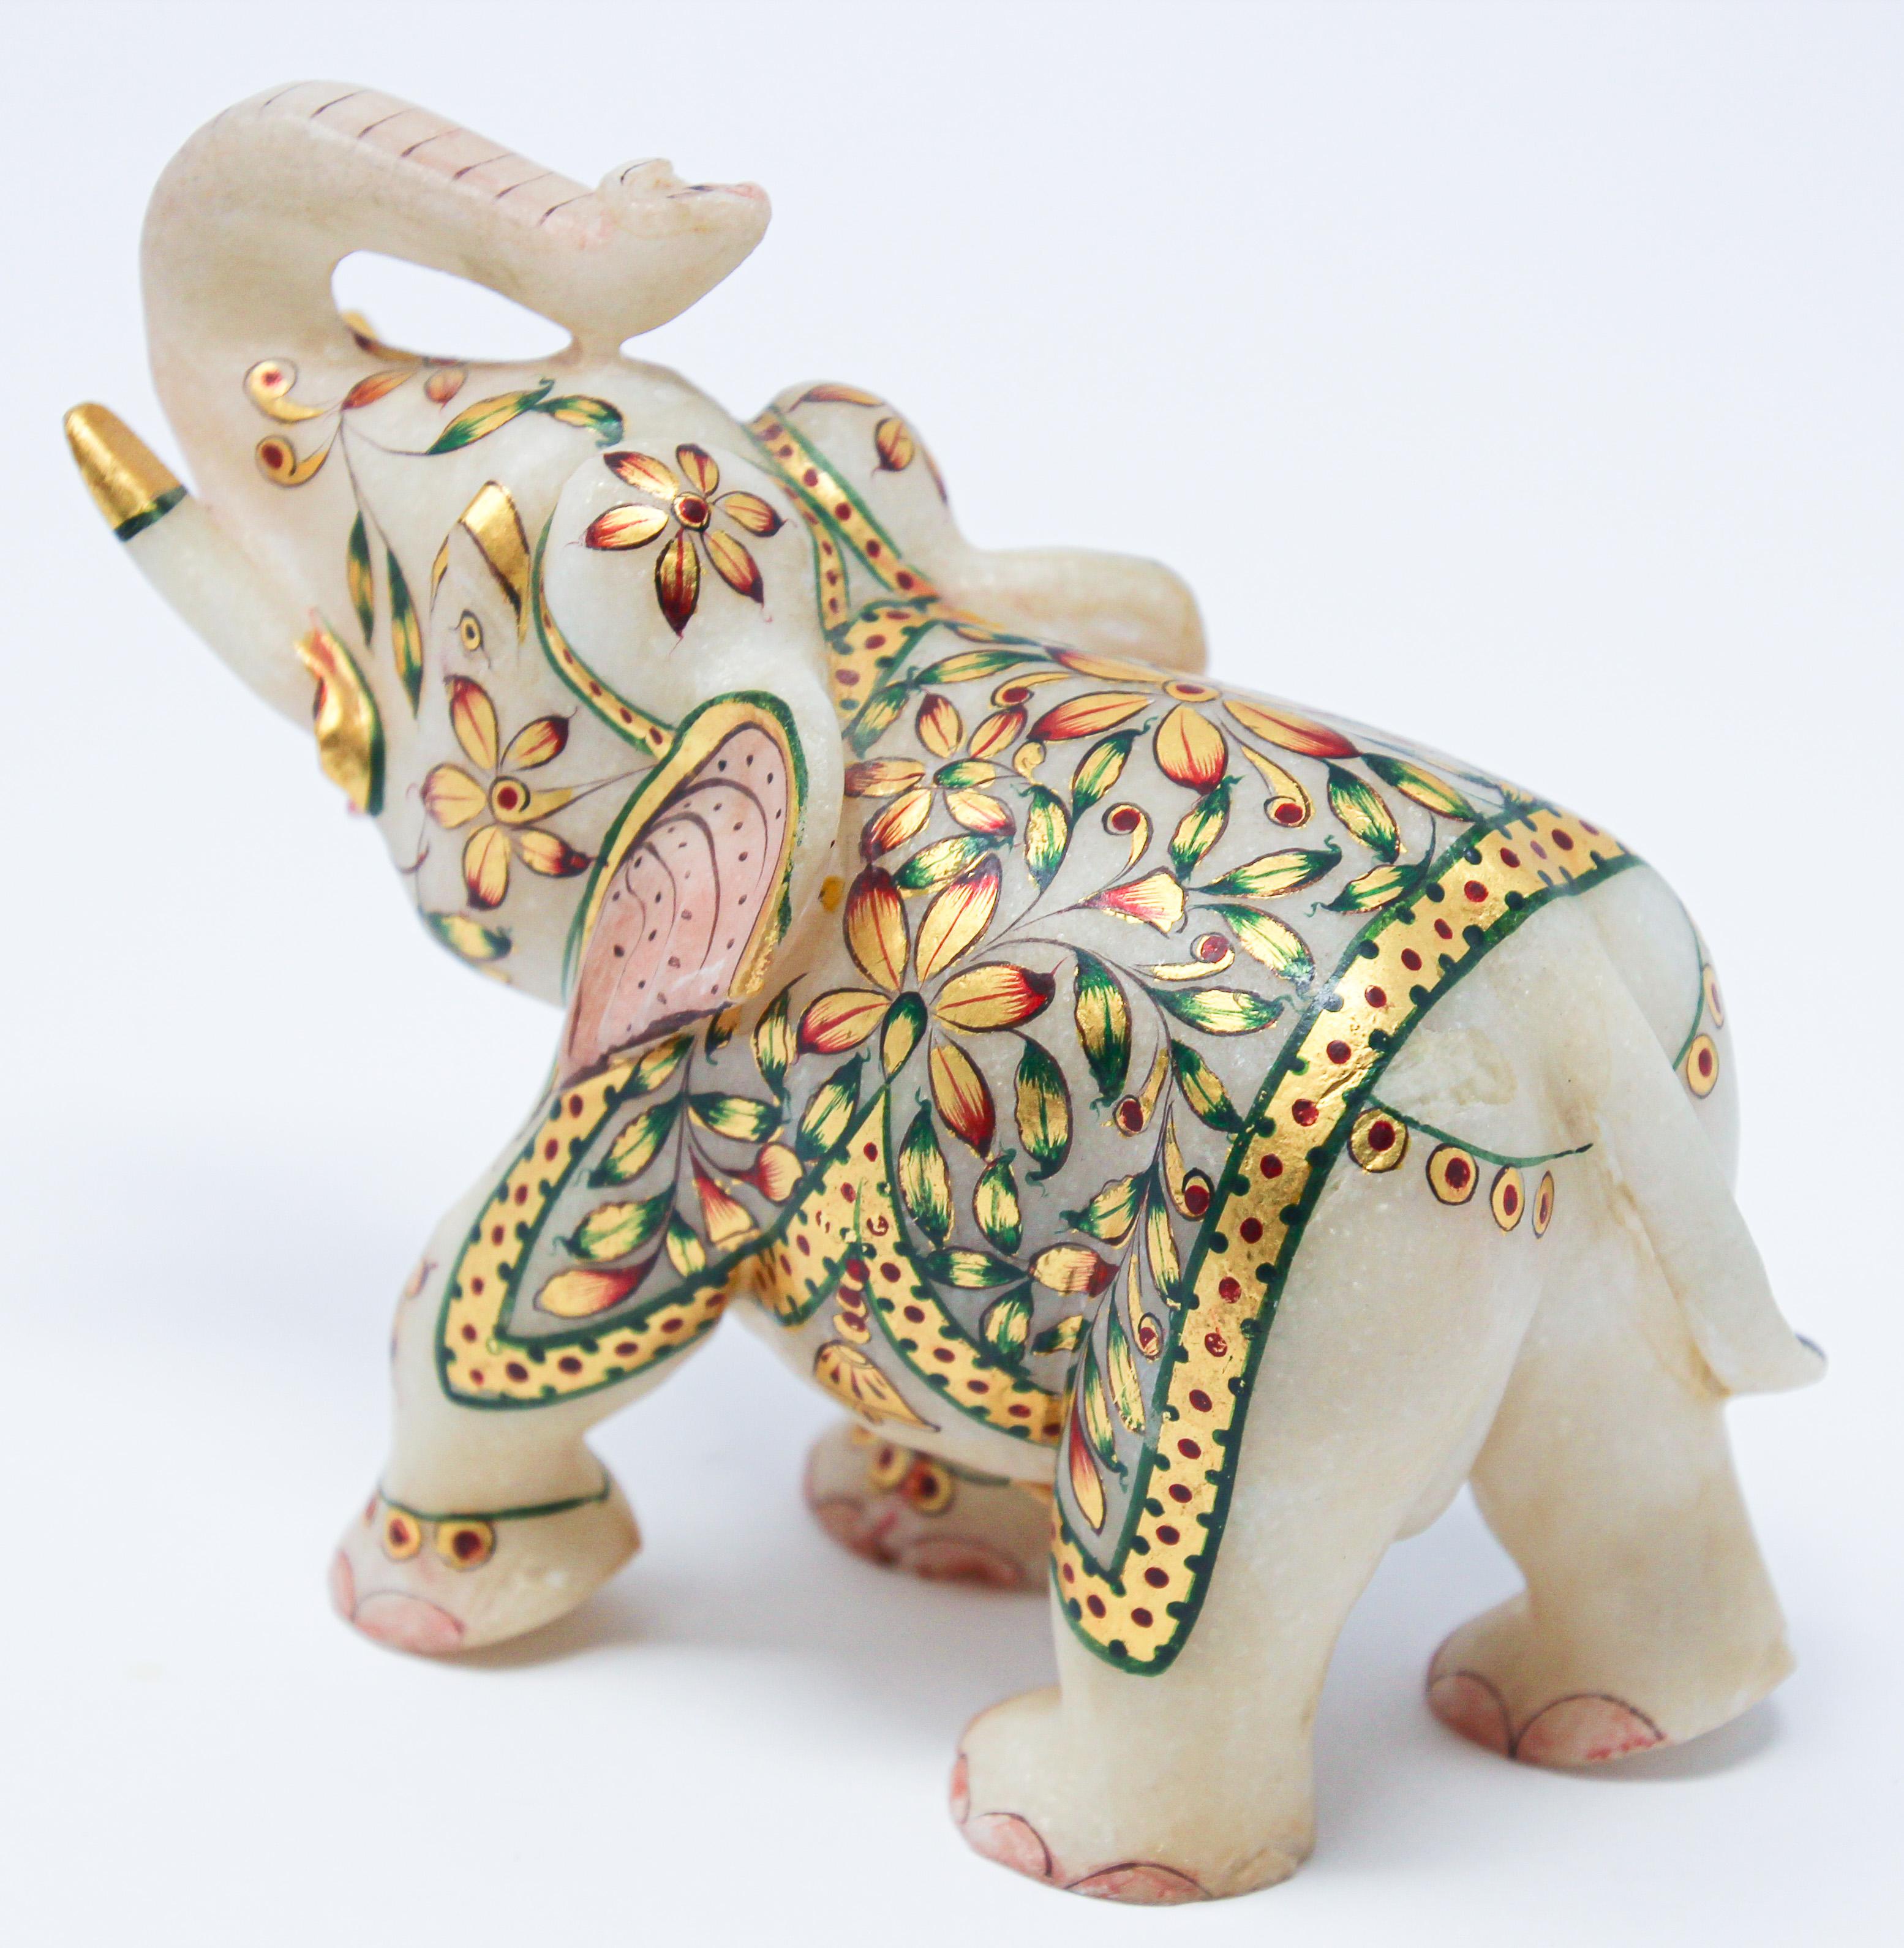 Vintage White Marble Jeweled Elephant Sculpture Paper Weight 2